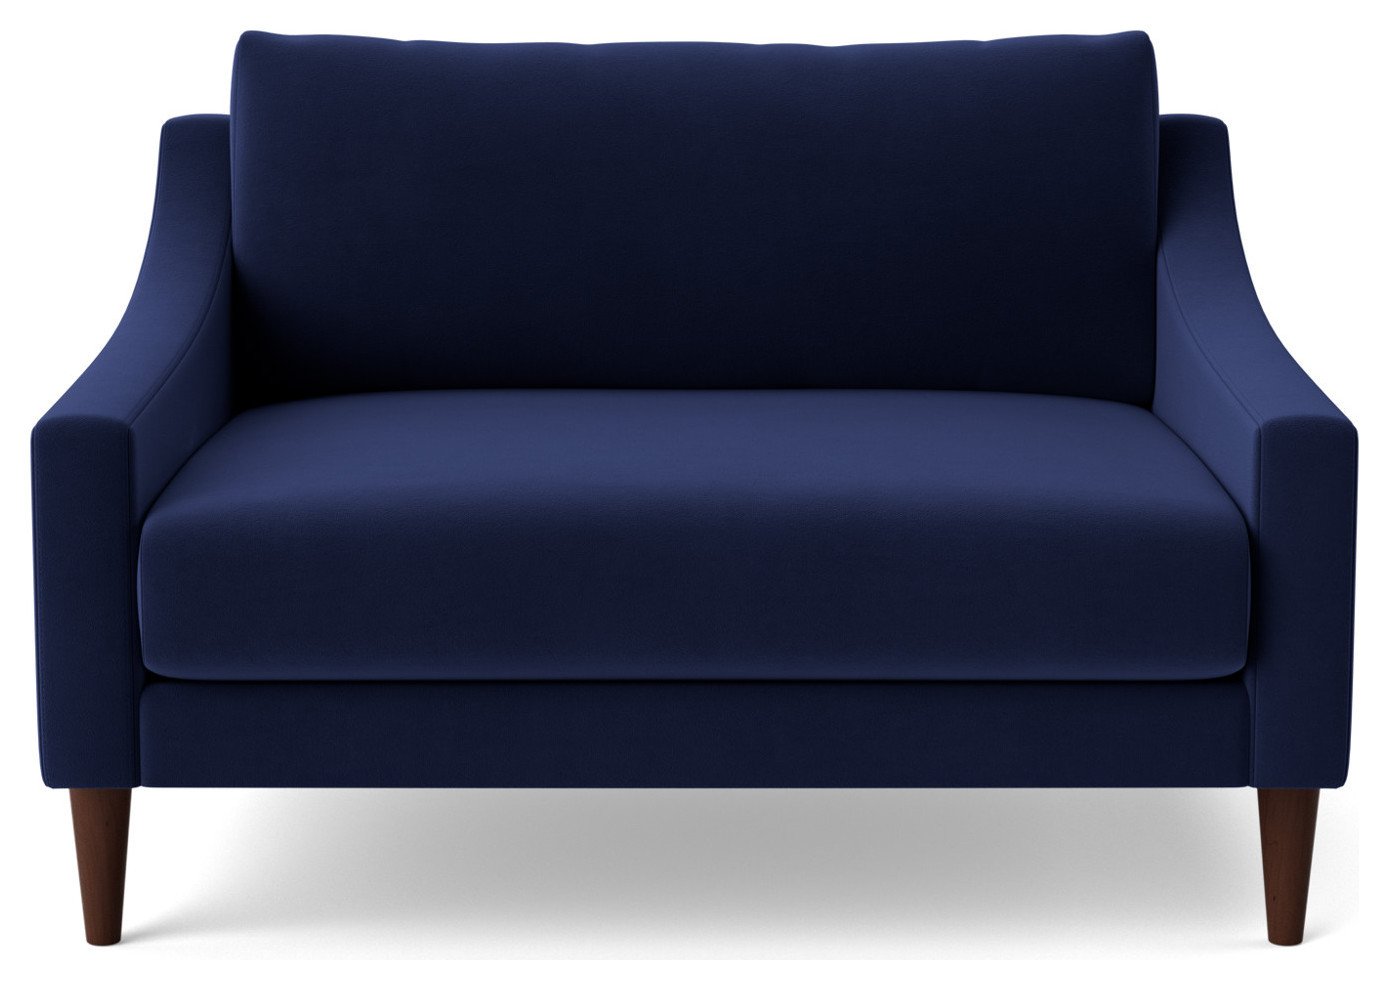 Swoon Turin Velvet Cuddle Chair - Ink Blue